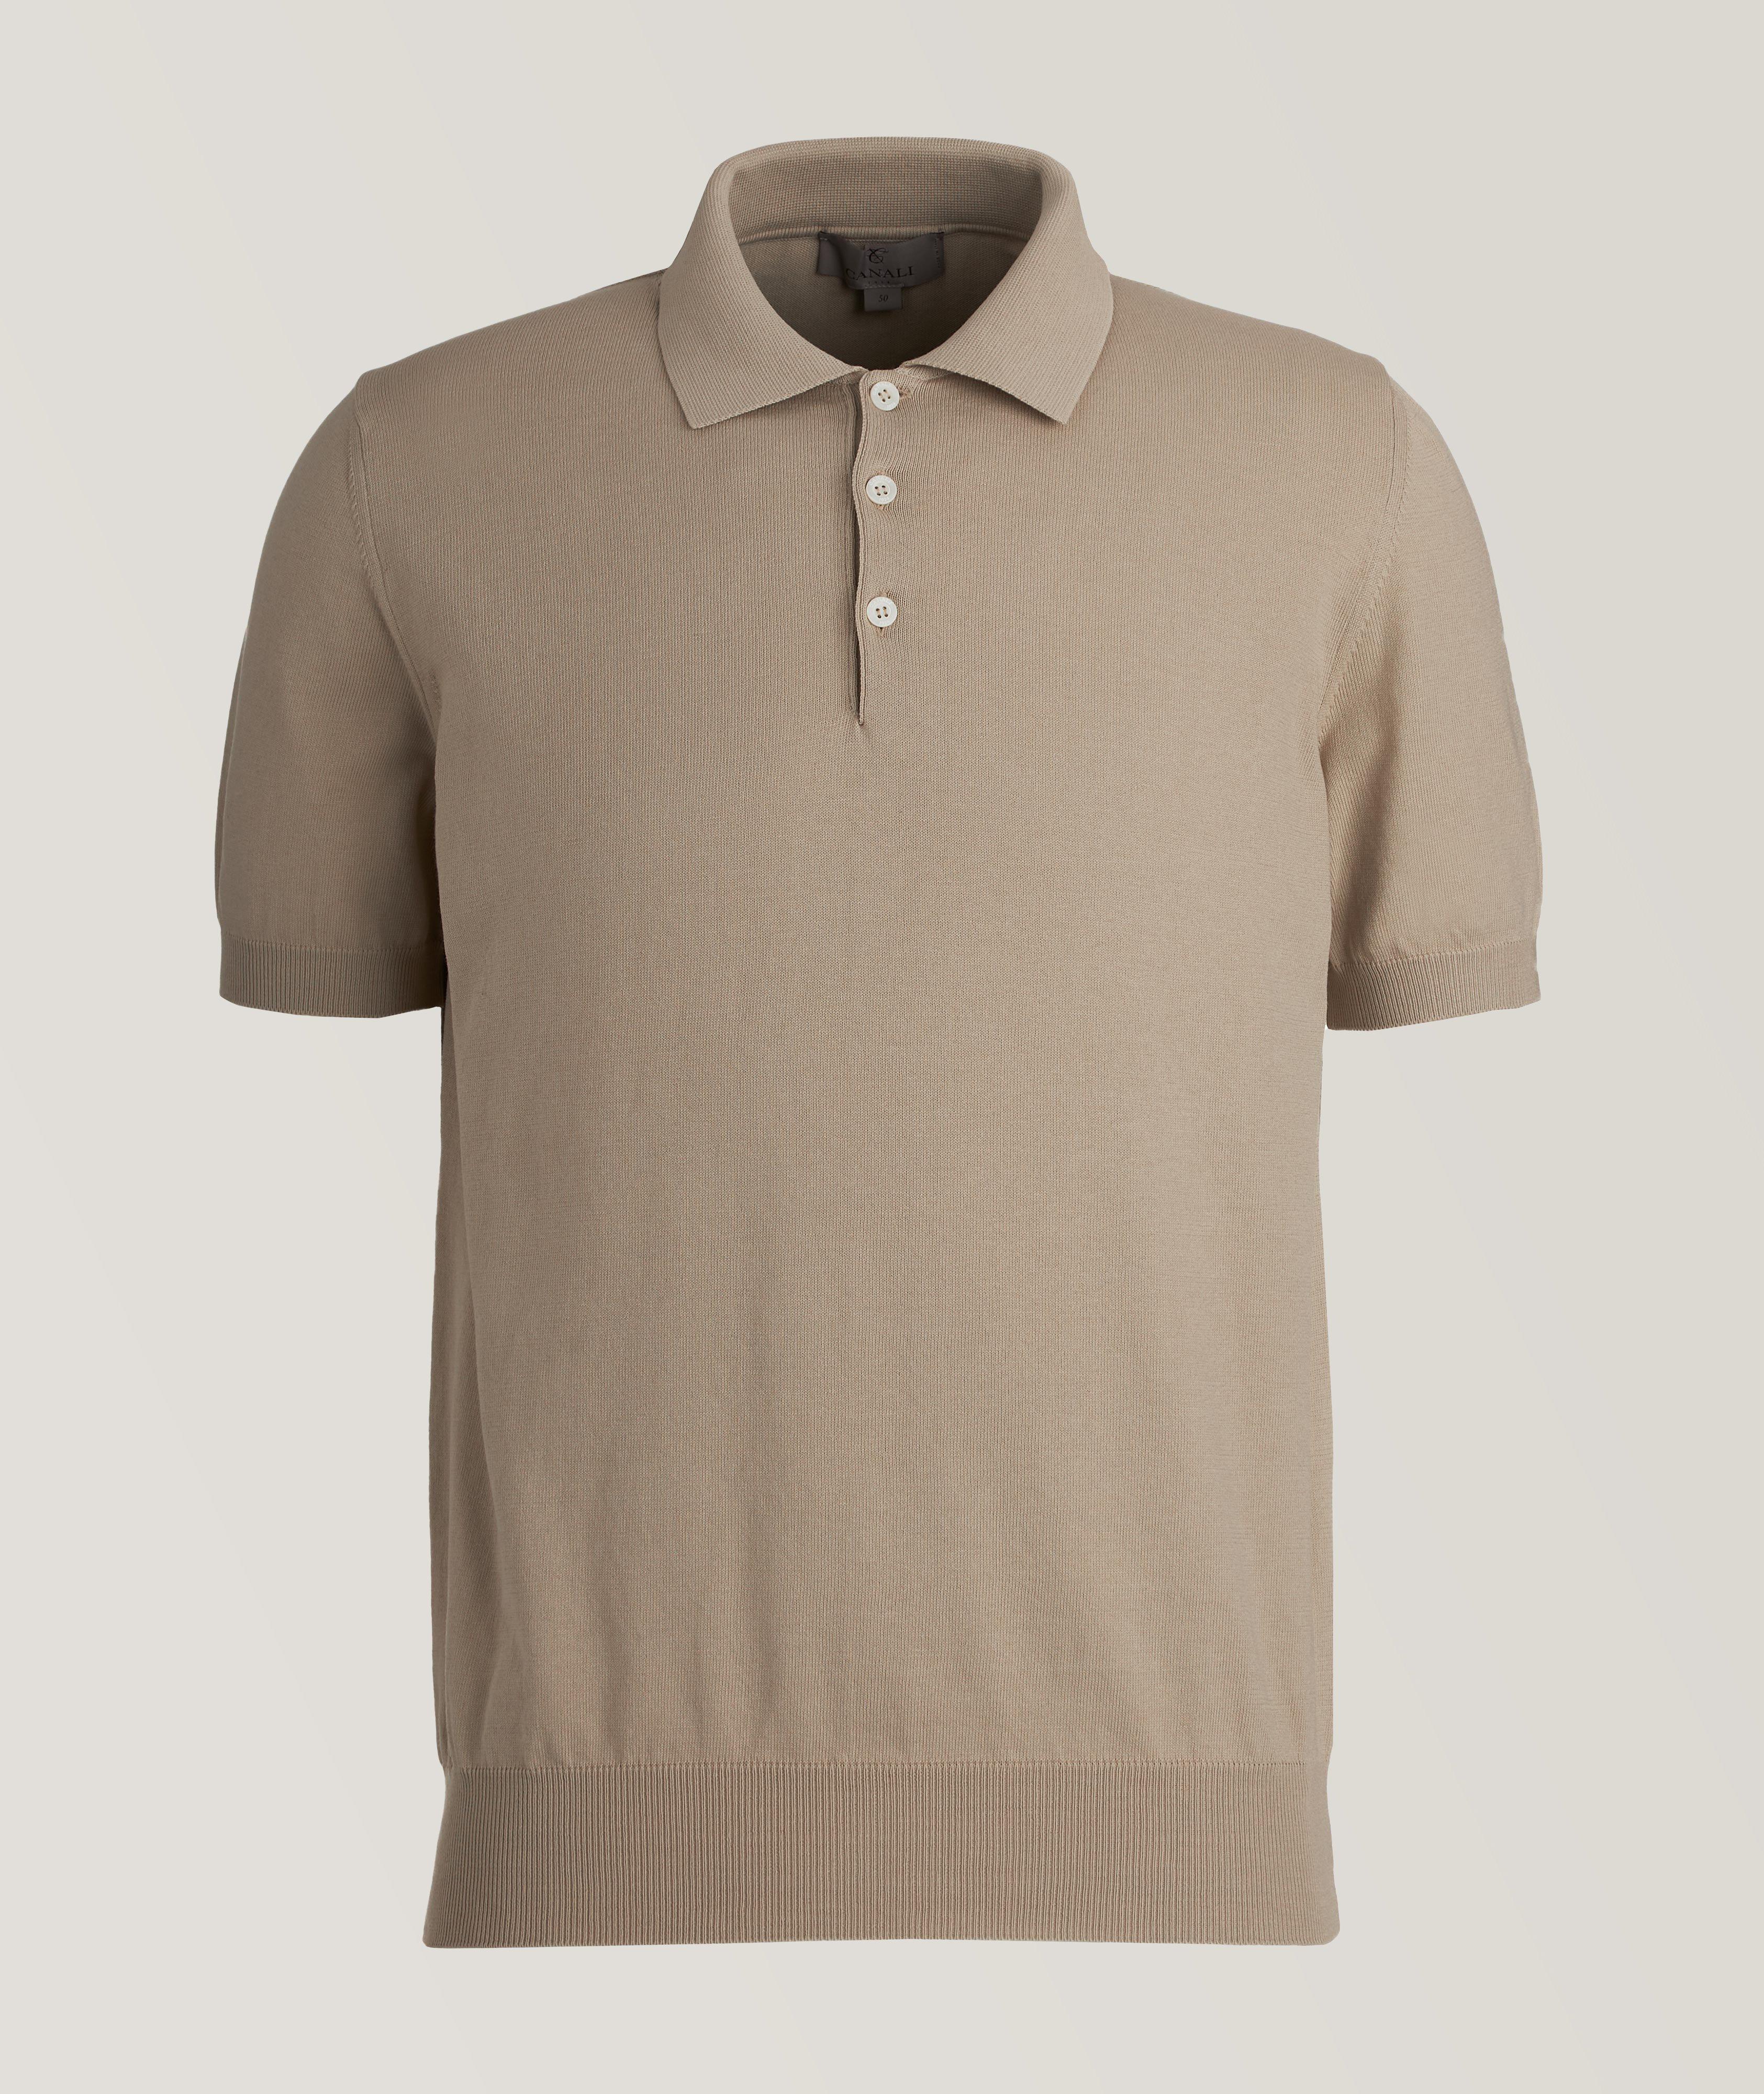 Solid Cotton Knit Polo image 0